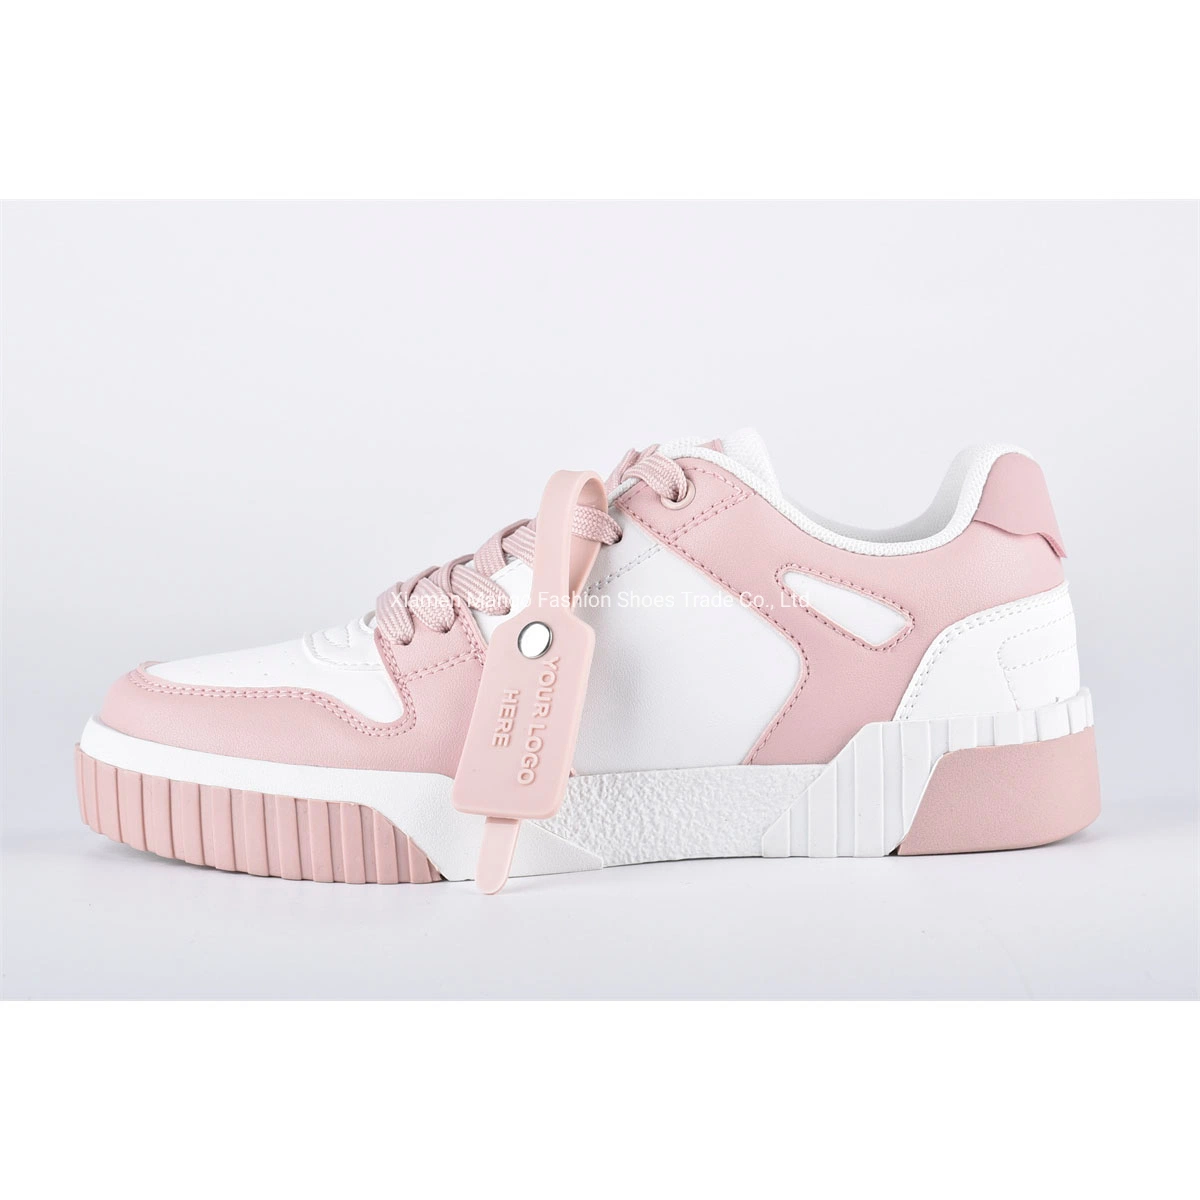 Newly Designed Ladies Low Top Pink Skate Shoes Lace-up Trainers Flat Skate Skateboard Shoes Walking Shoes